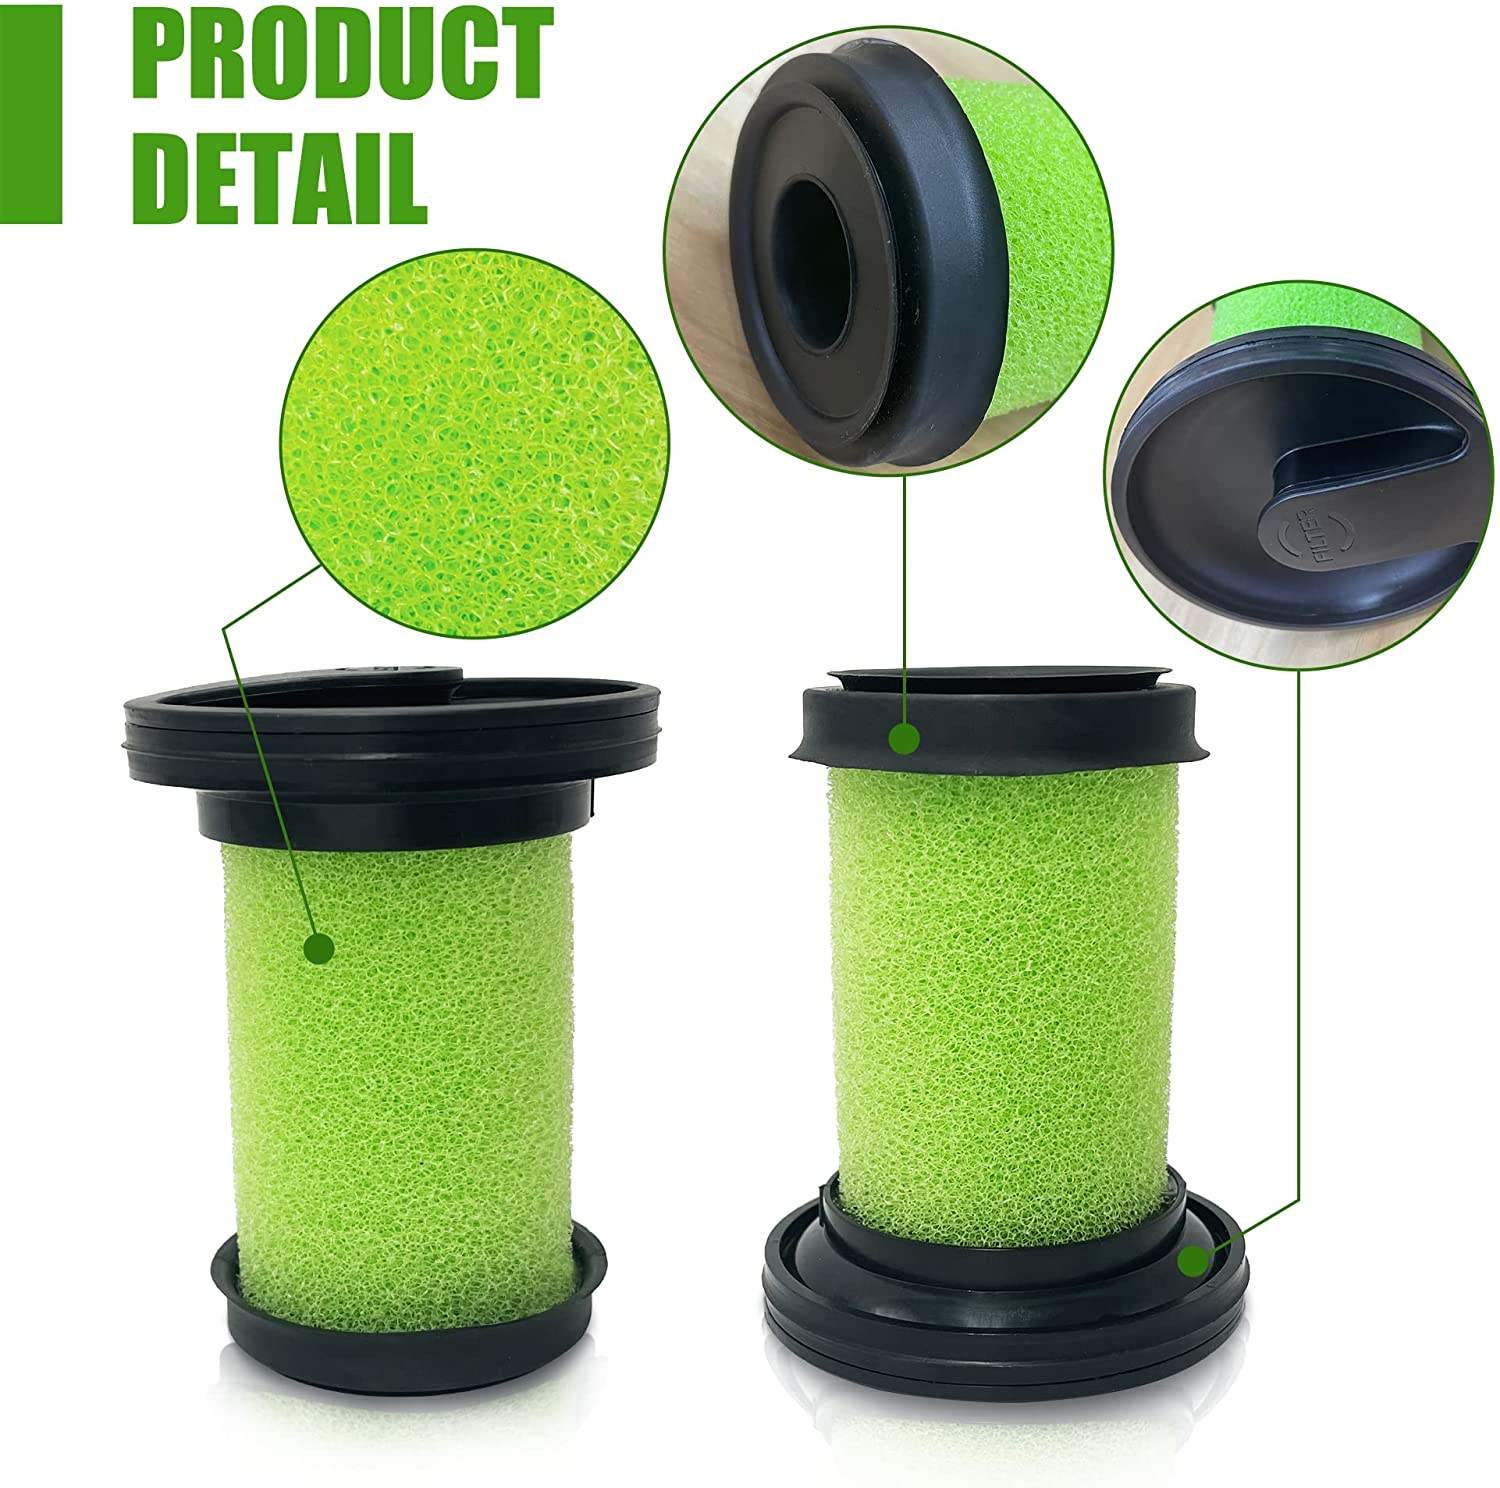 Washable and Reusable Filter for Gtech Multi Handheld Vacuum Cleaner